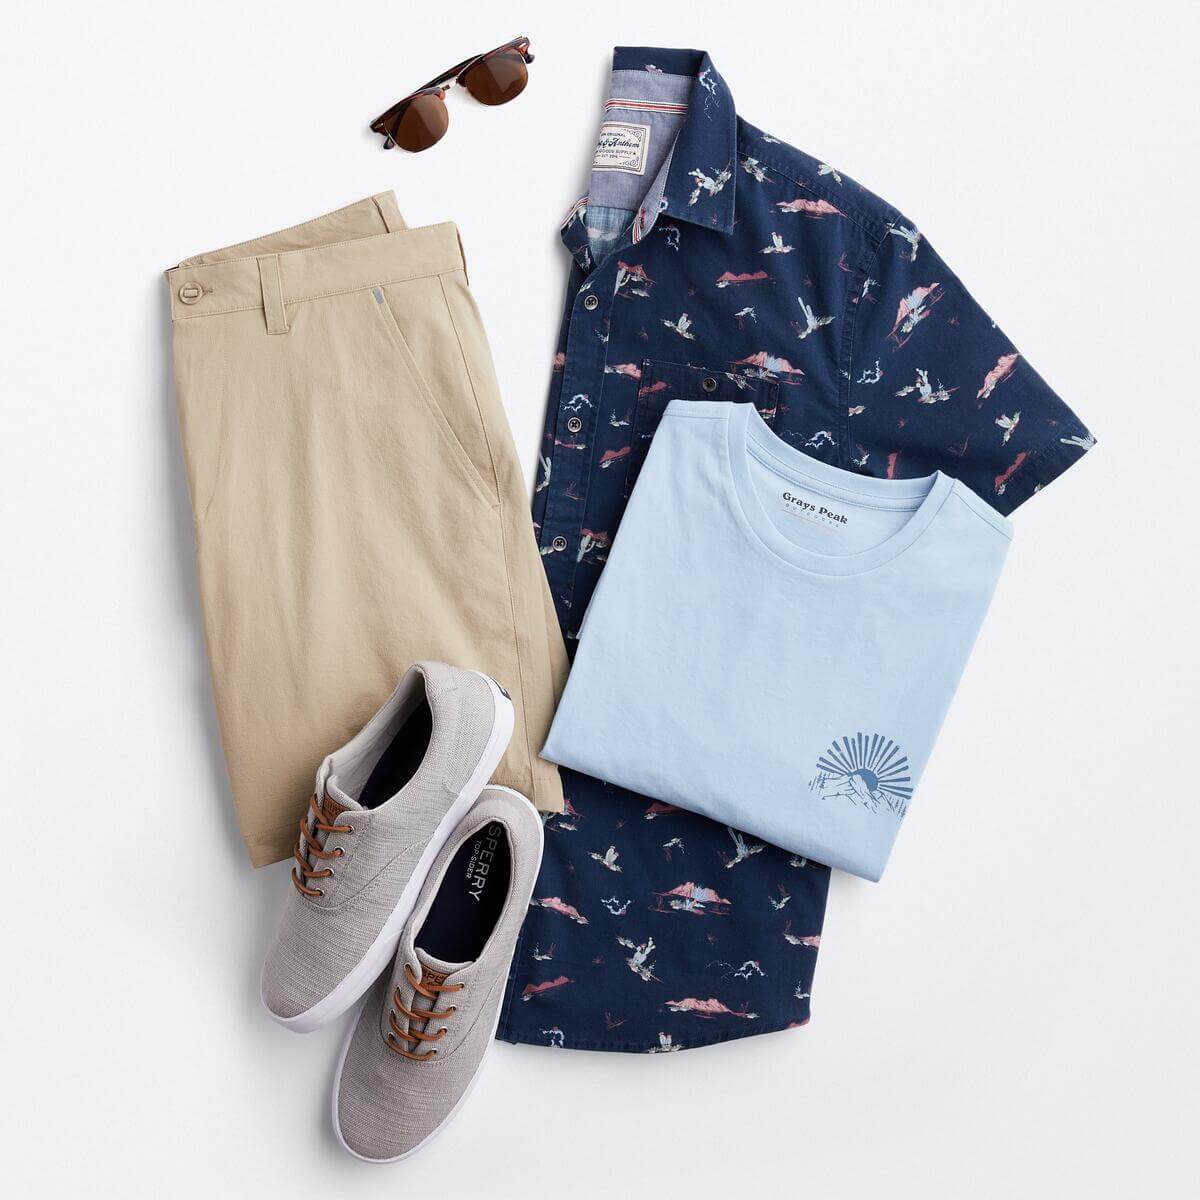 coastal casual wedding outfit for men